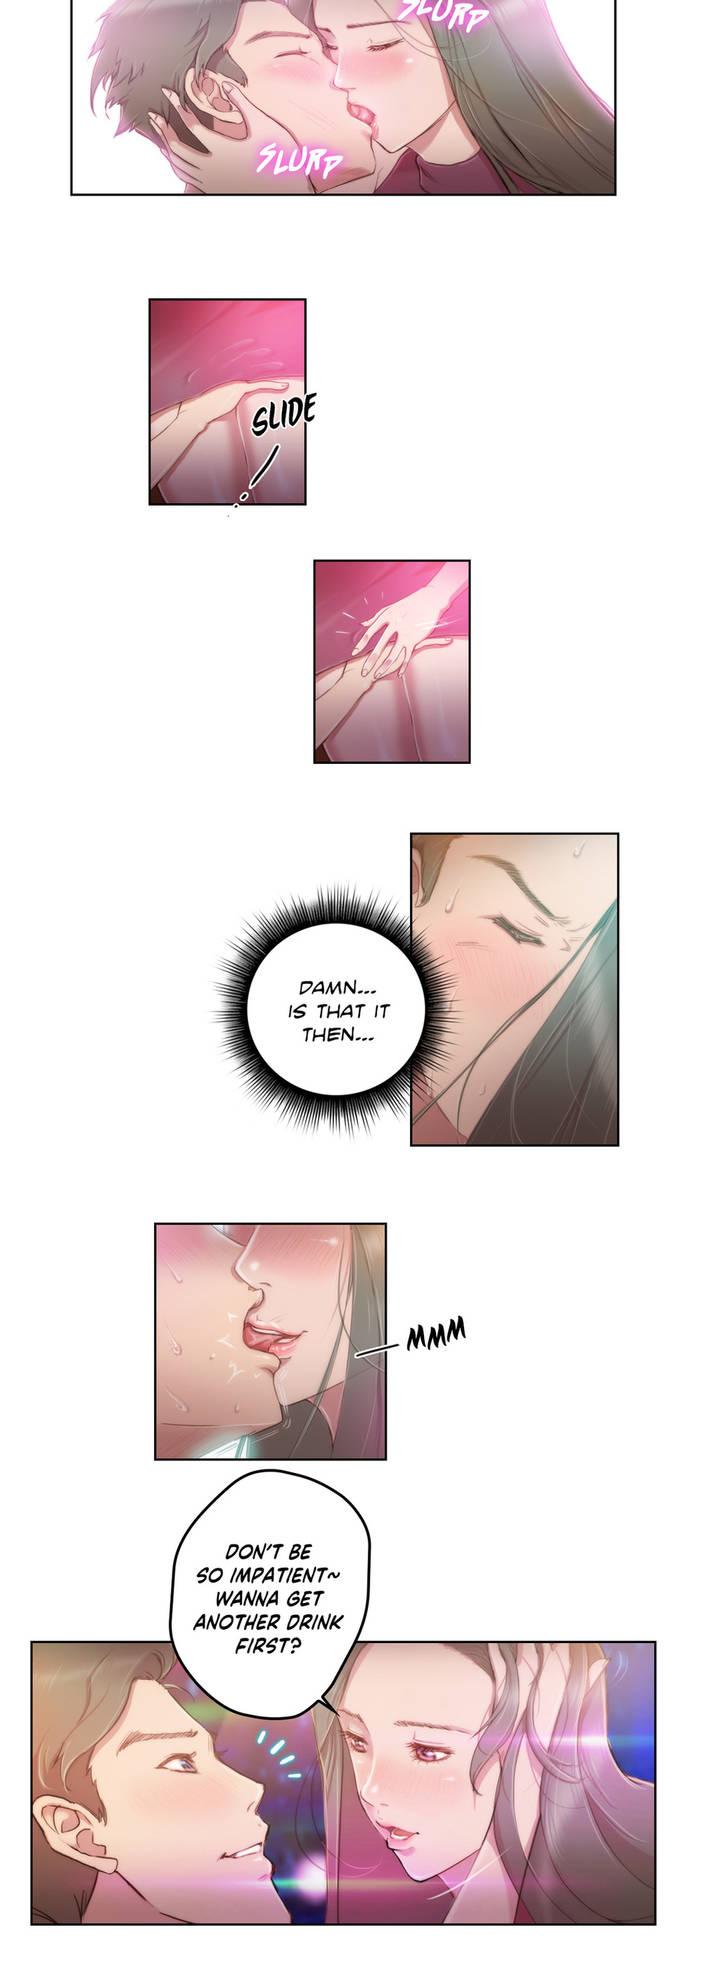 Gaping [BYMAN] Sex Knights-Erotic Sensuality & Perception Ch.1-12 (English) (Ongoing) Stepsiblings - Page 4